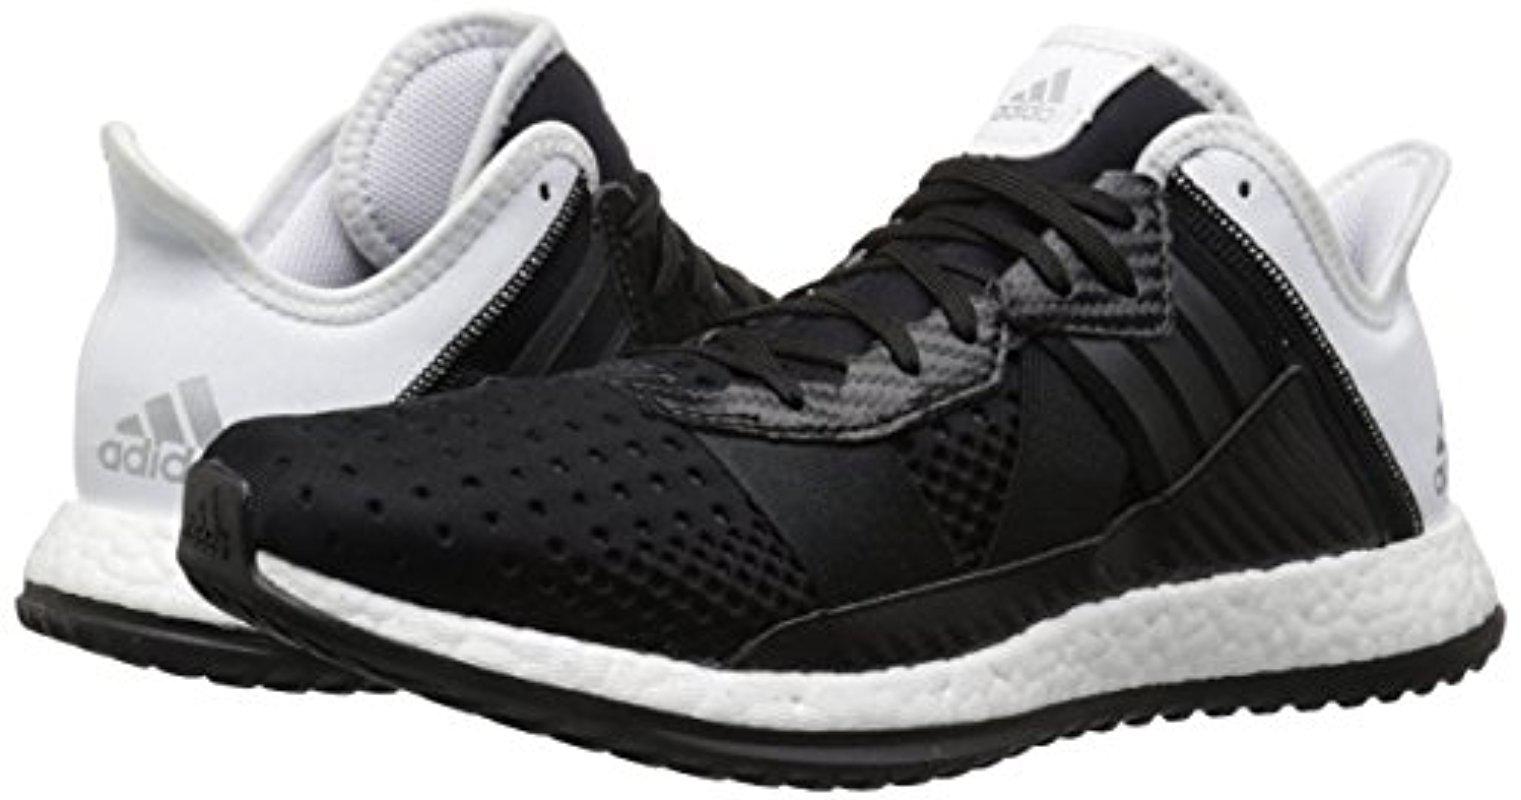 Shopping Adidas Pure Boost Zg Trainer